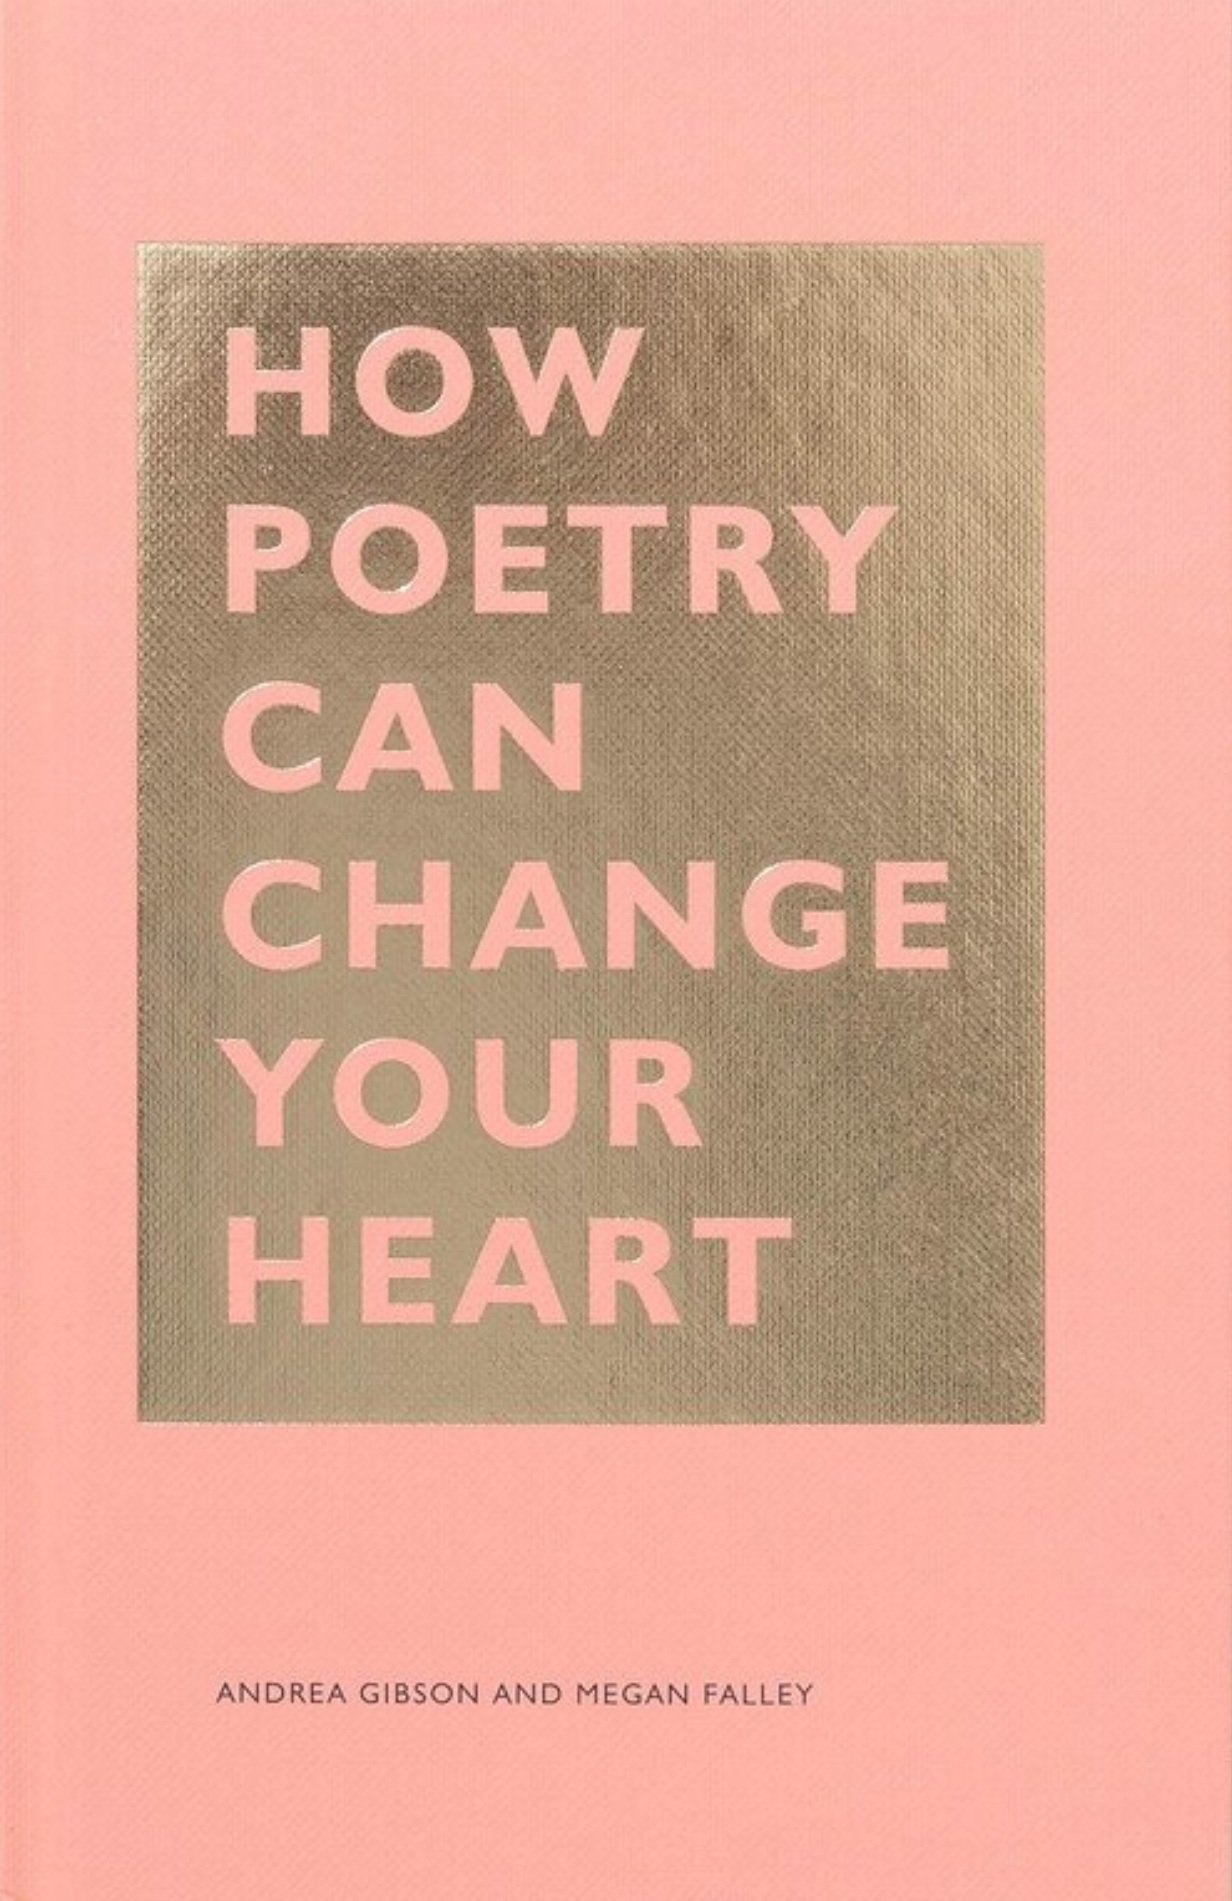 How+Poetry+Can+Change+Your+Heart.jpg